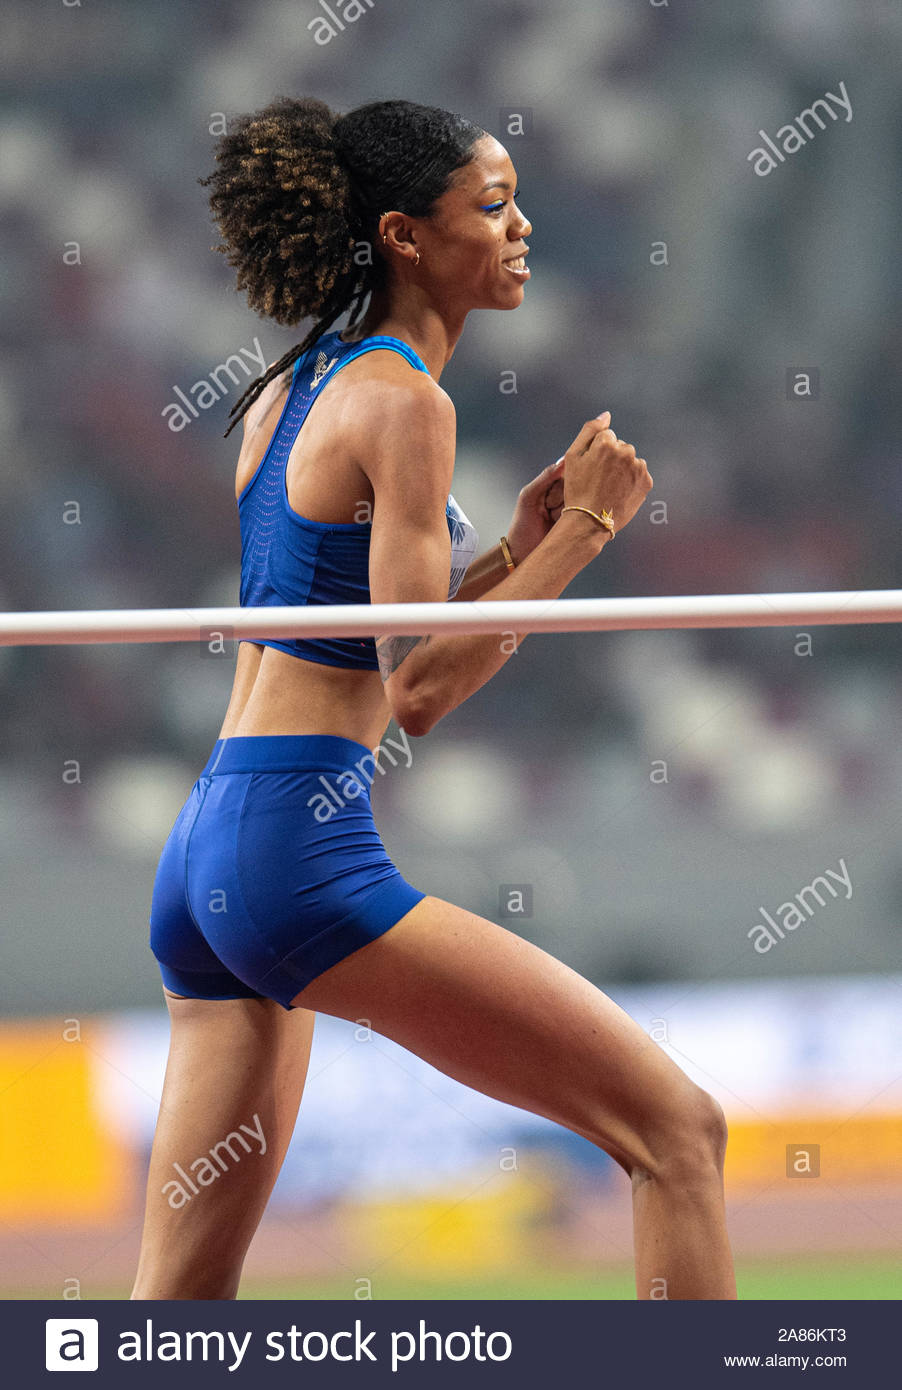 doha-qatar-sept-30-vashti-cunningham-of-the-usa-competing-in-the-high-jump-final-on-day-4-of-the-17th-iaaf-world-athletics-championships-2019-kali-2A86KT3.jpg